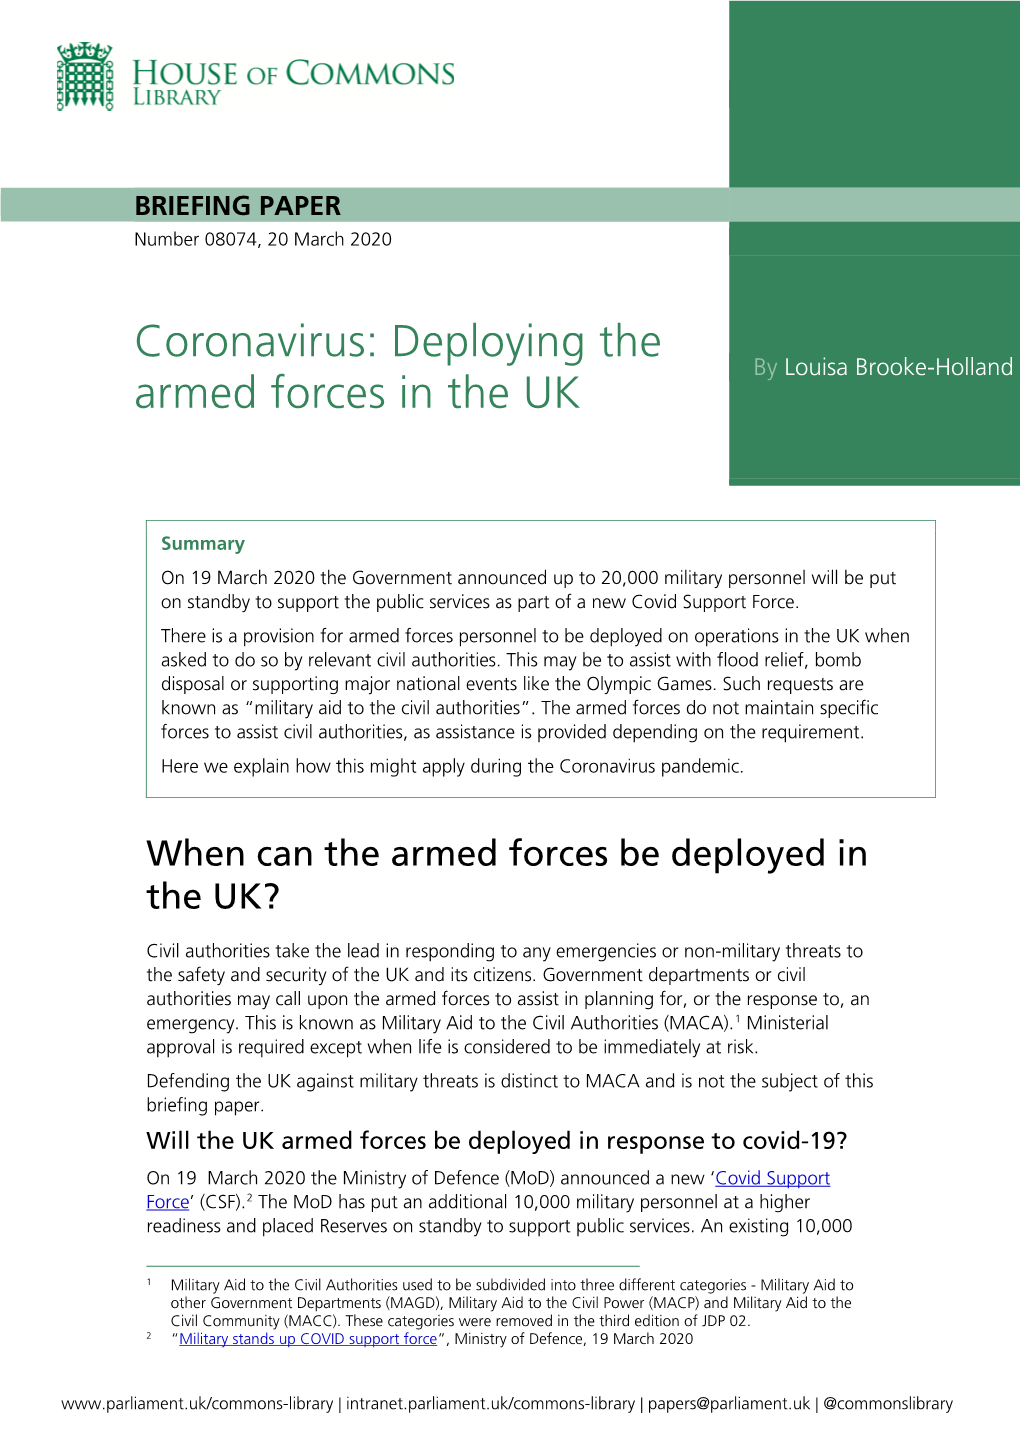 Coronavirus: Deploying the Armed Forces in the UK